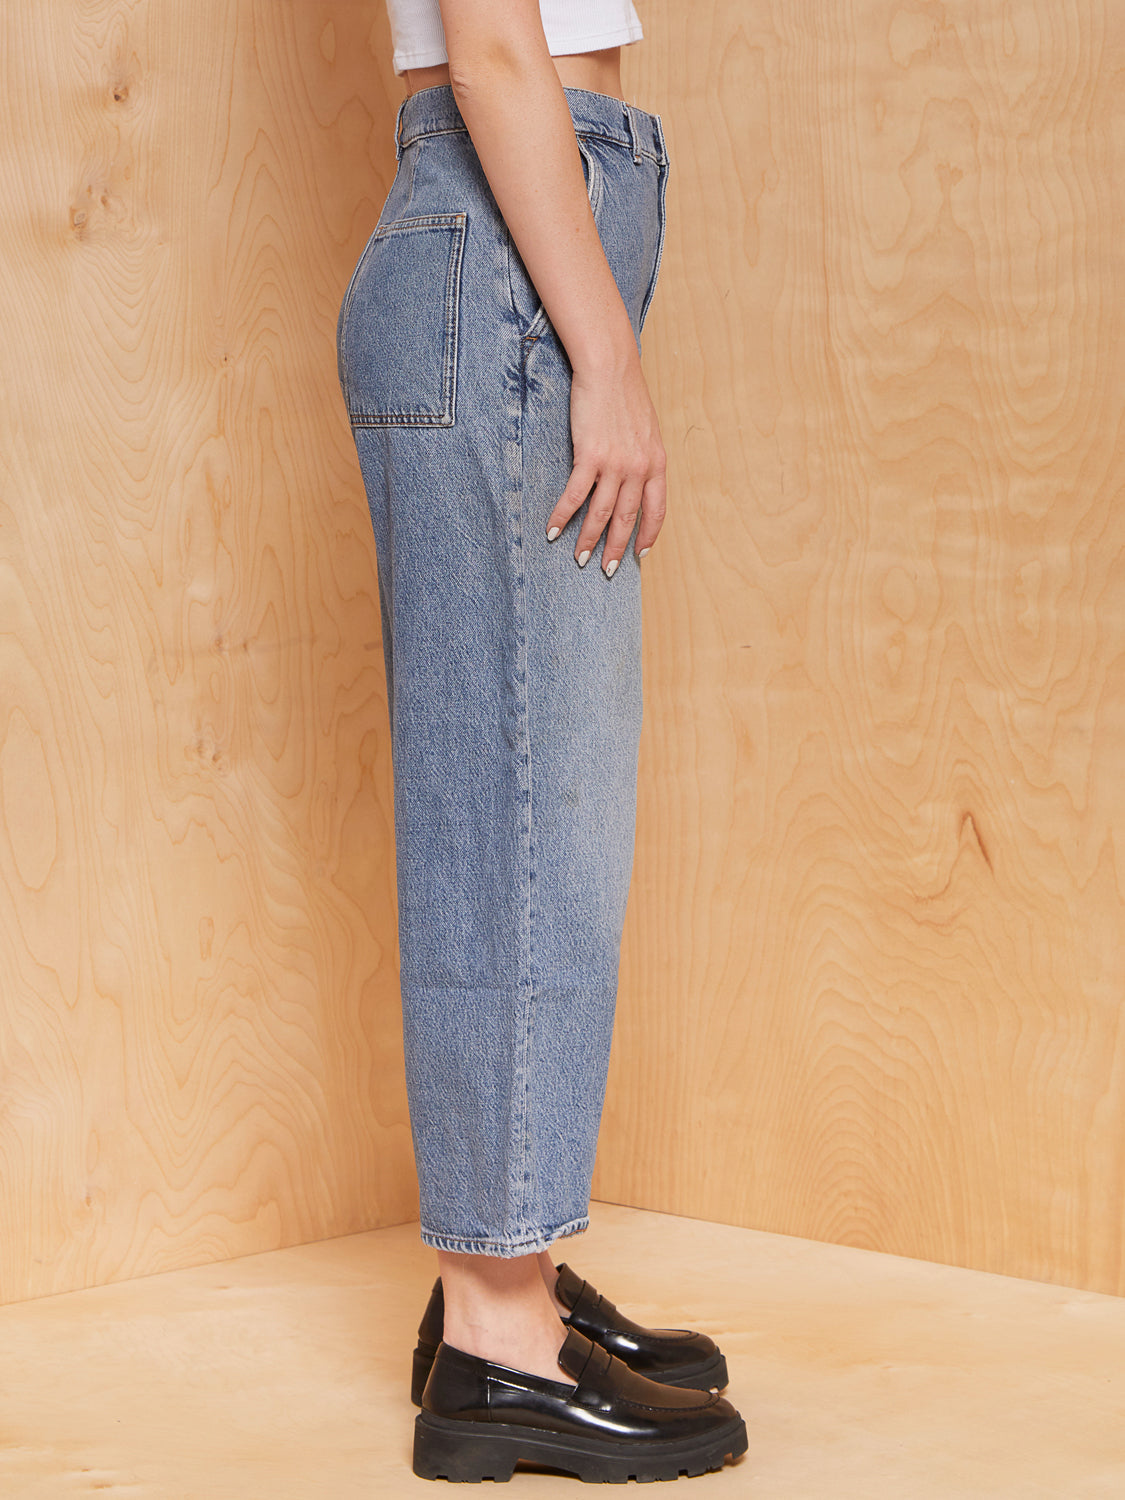 COS Cropped Wide Leg Light Wash Jeans